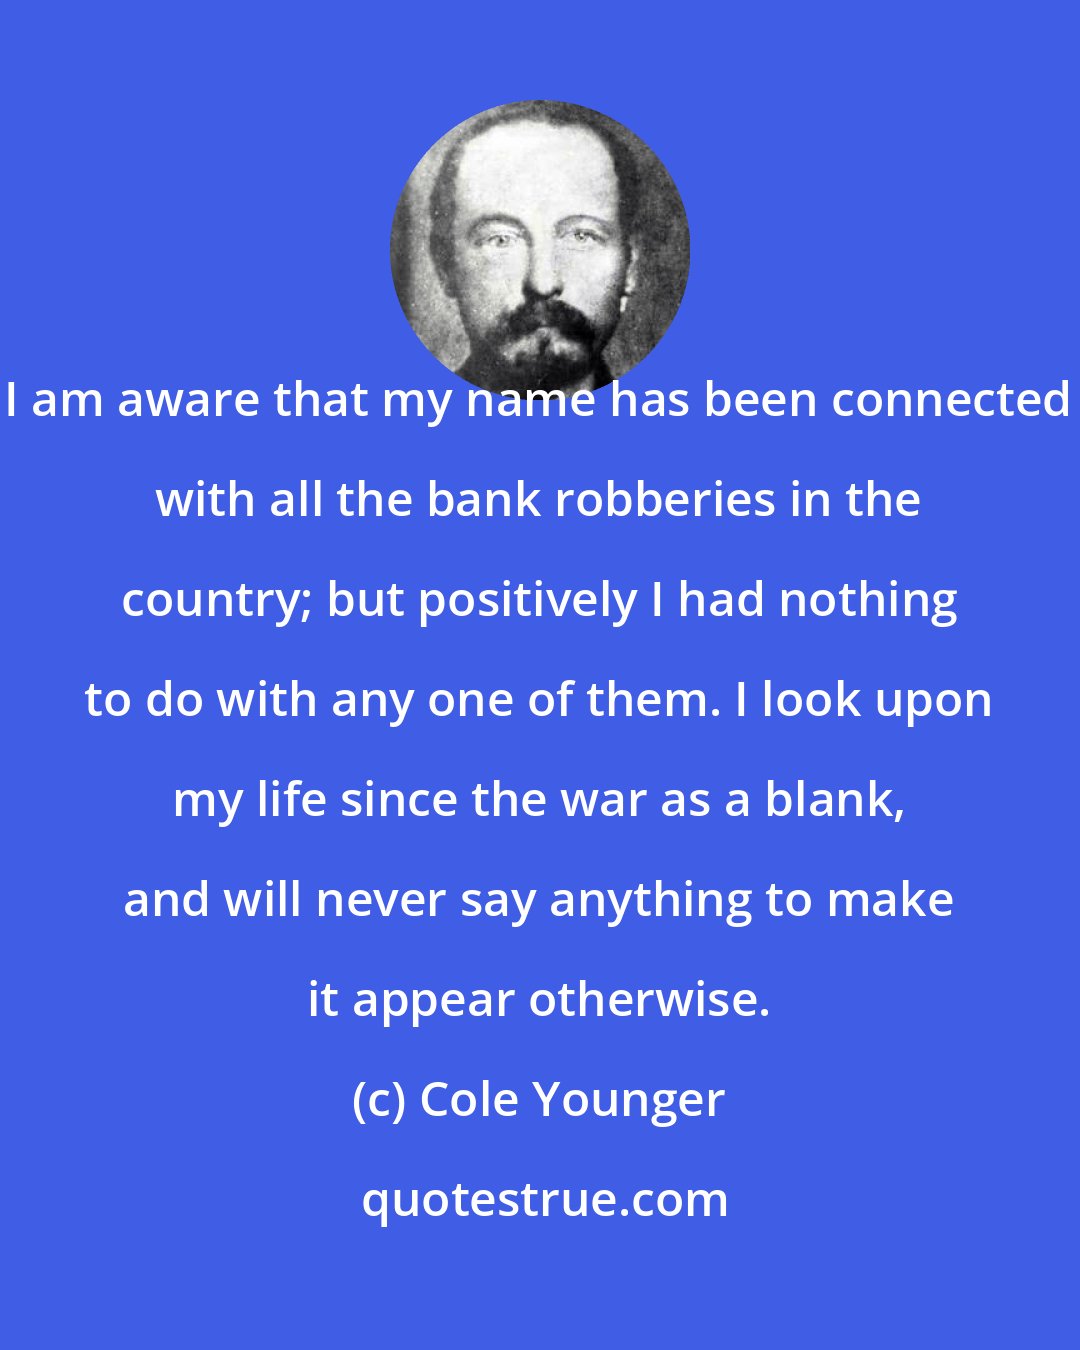 Cole Younger: I am aware that my name has been connected with all the bank robberies in the country; but positively I had nothing to do with any one of them. I look upon my life since the war as a blank, and will never say anything to make it appear otherwise.